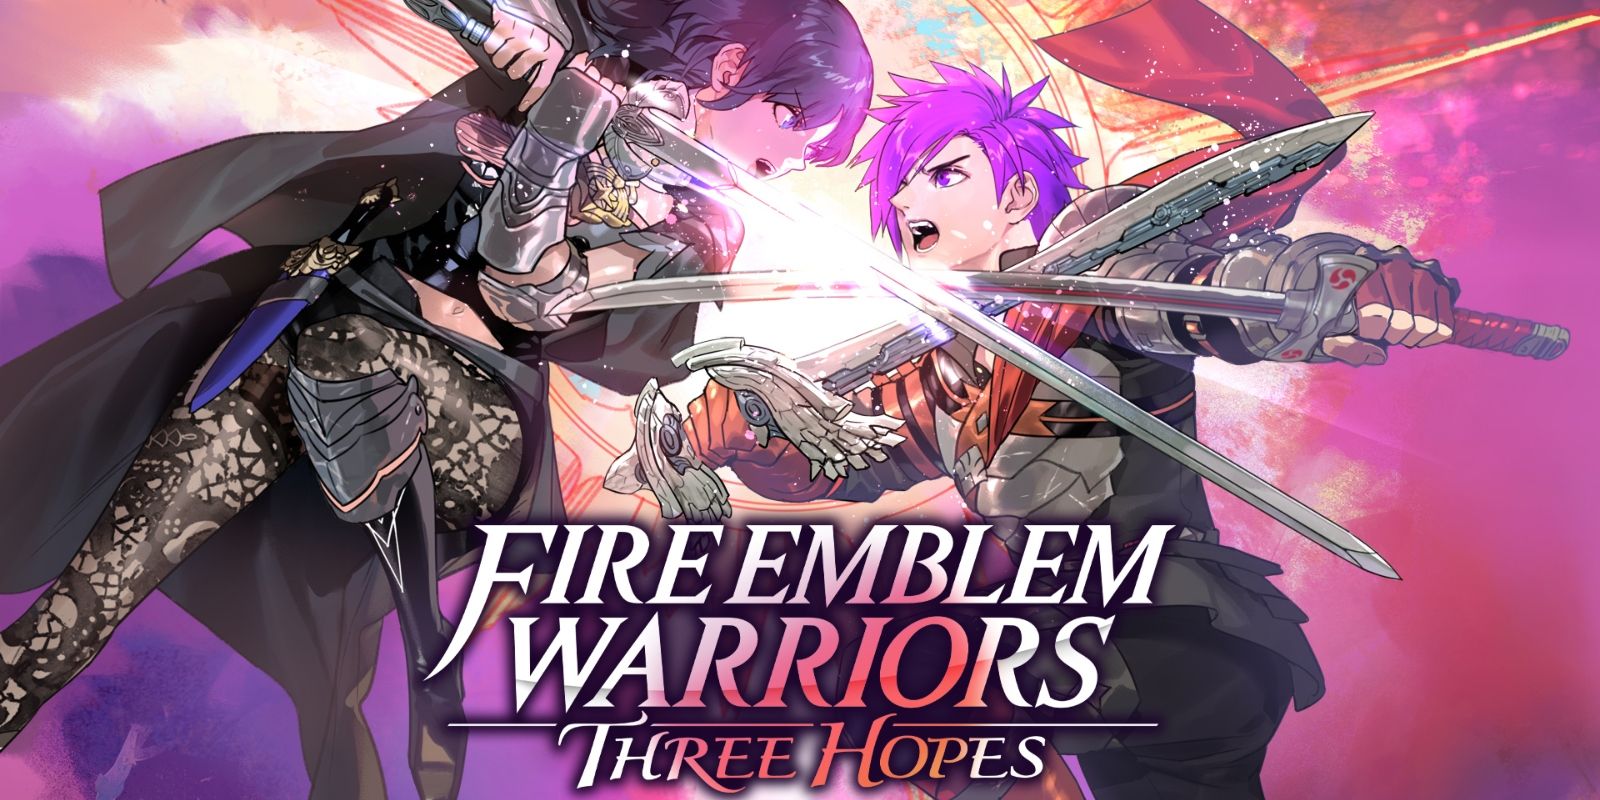 Shez and Female Byleth clashing swords in the Fire Emblem Warriors: Three Hopes box art.